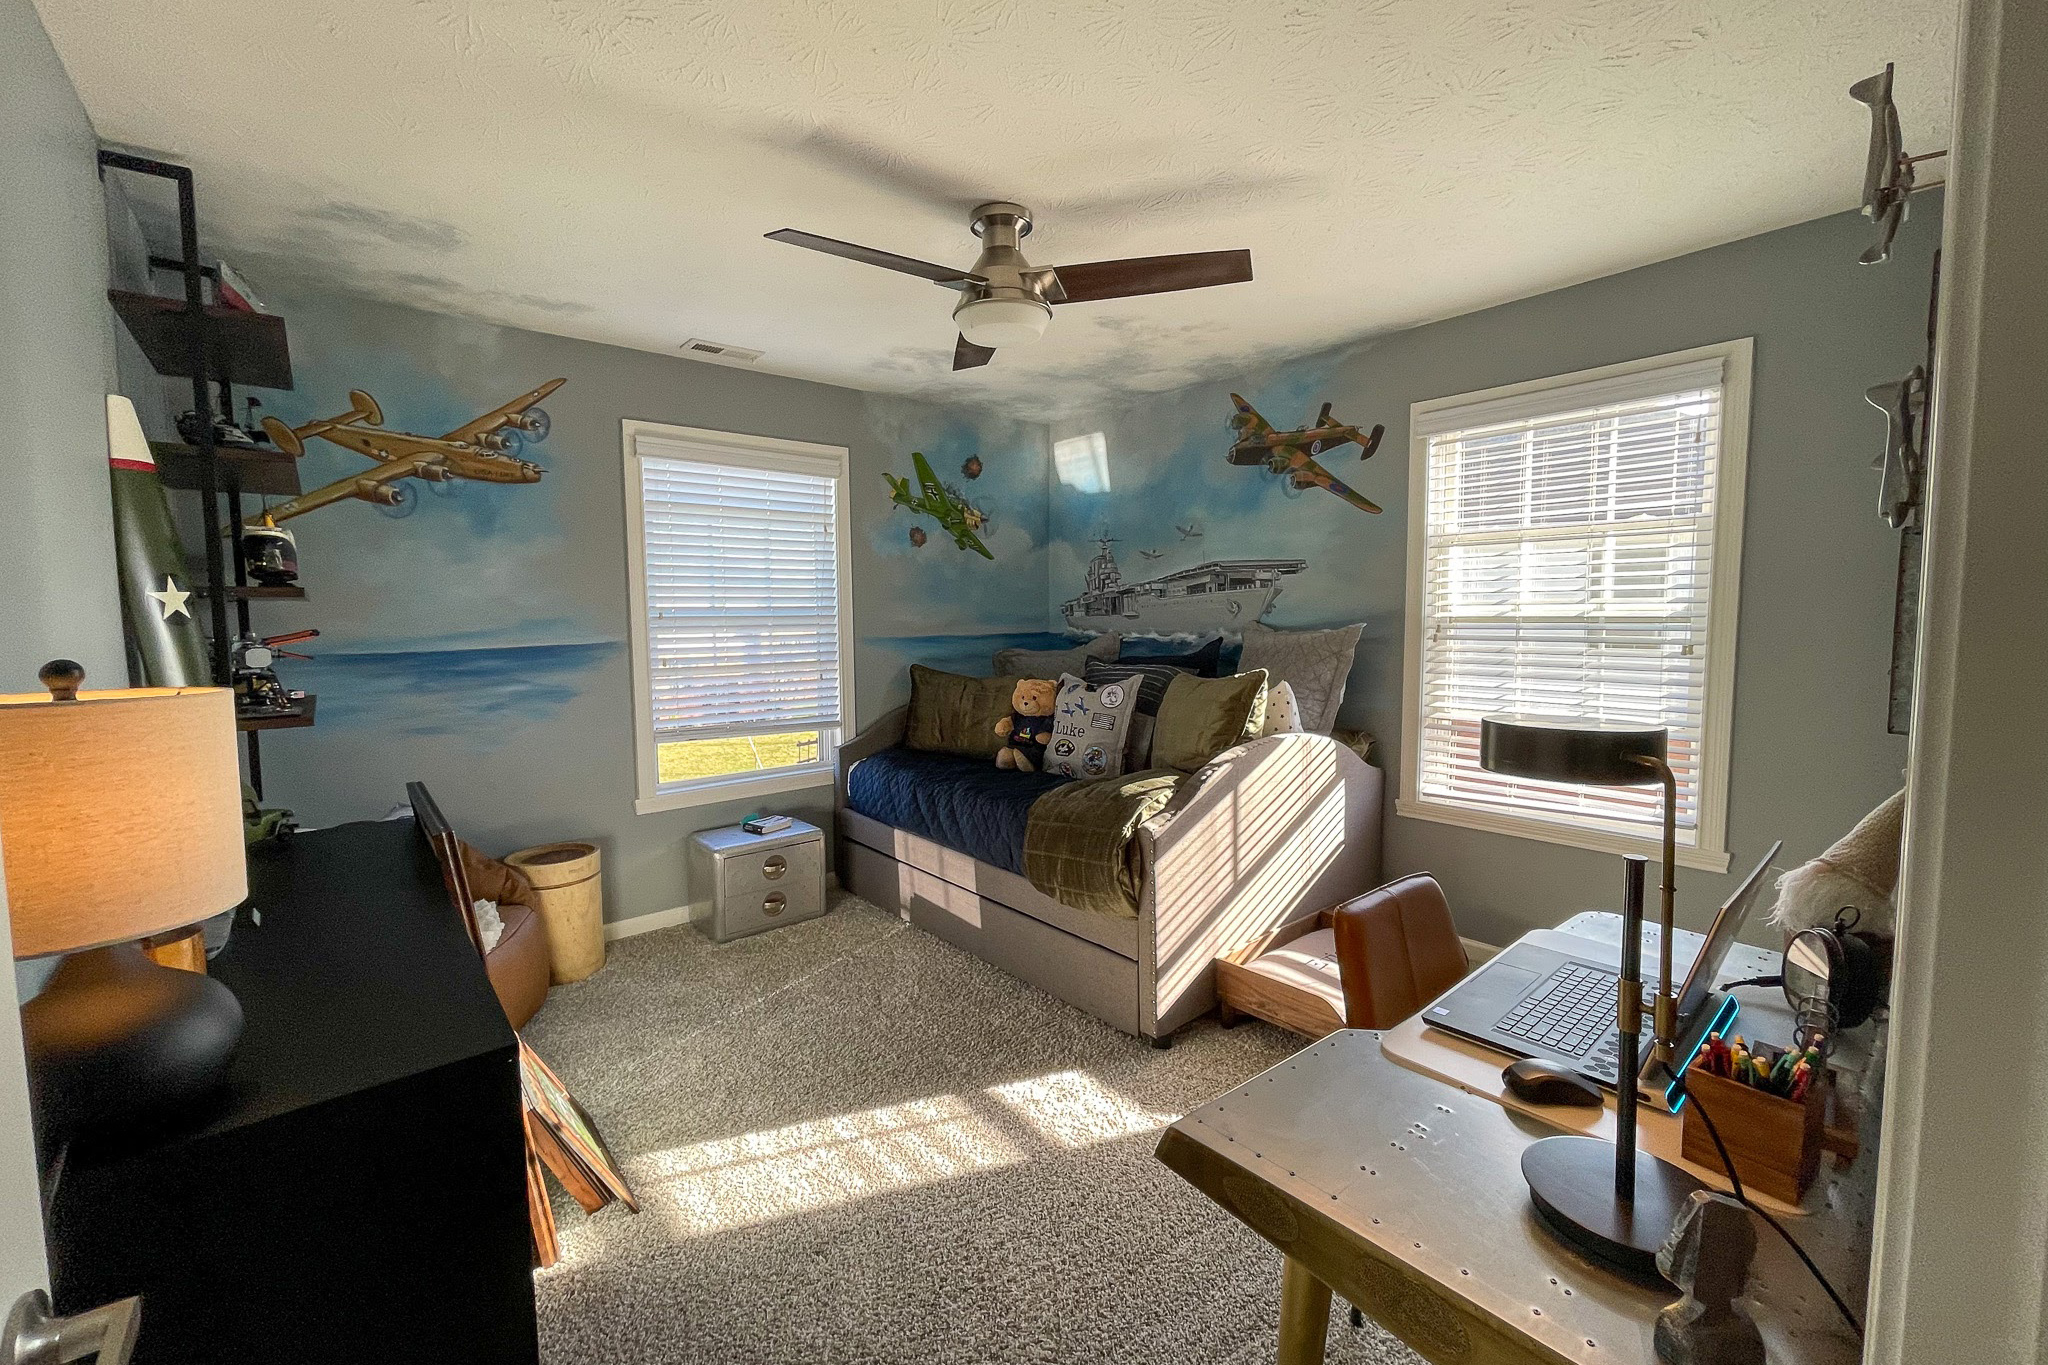 Luke’s brand-new WWII fighter plane-themed room, created by volunteers from Northwestern Mutual and Special Spaces